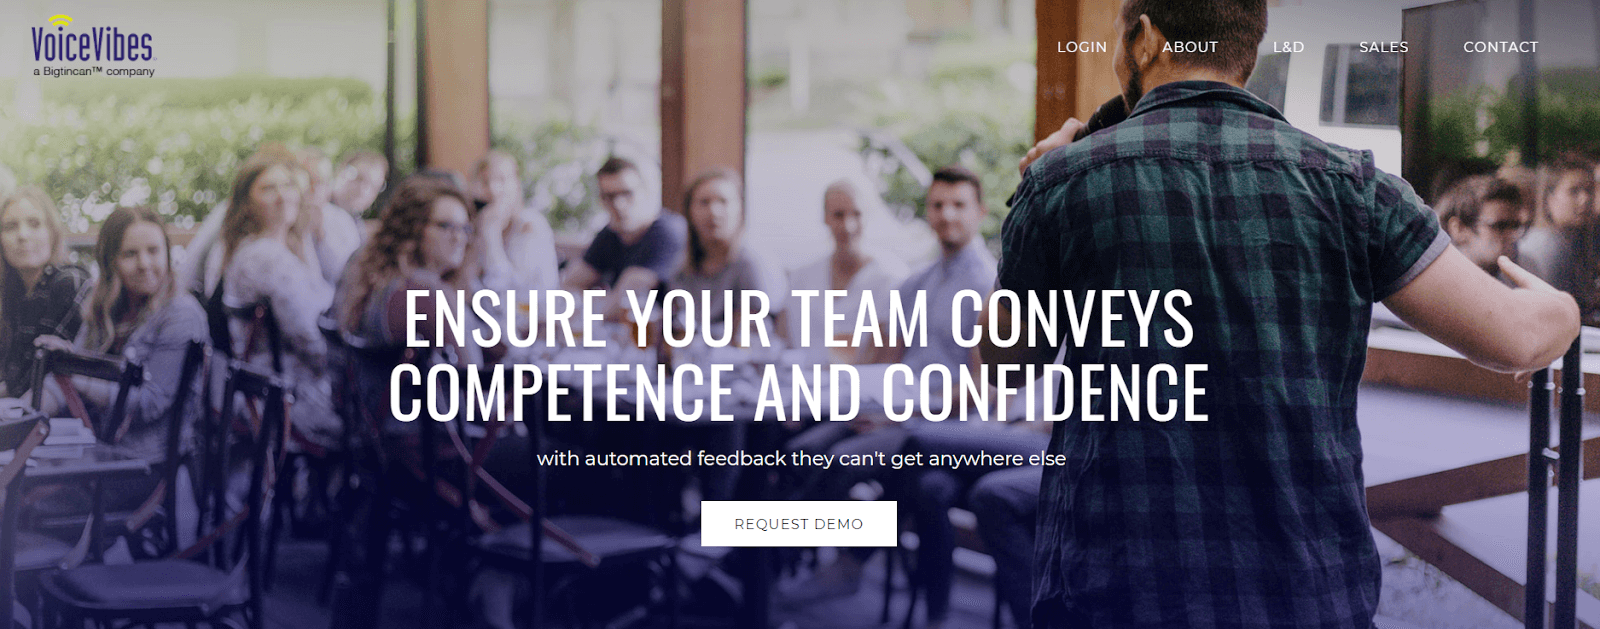 VocalVibes homepage: Ensure your team conveys competence and confidence